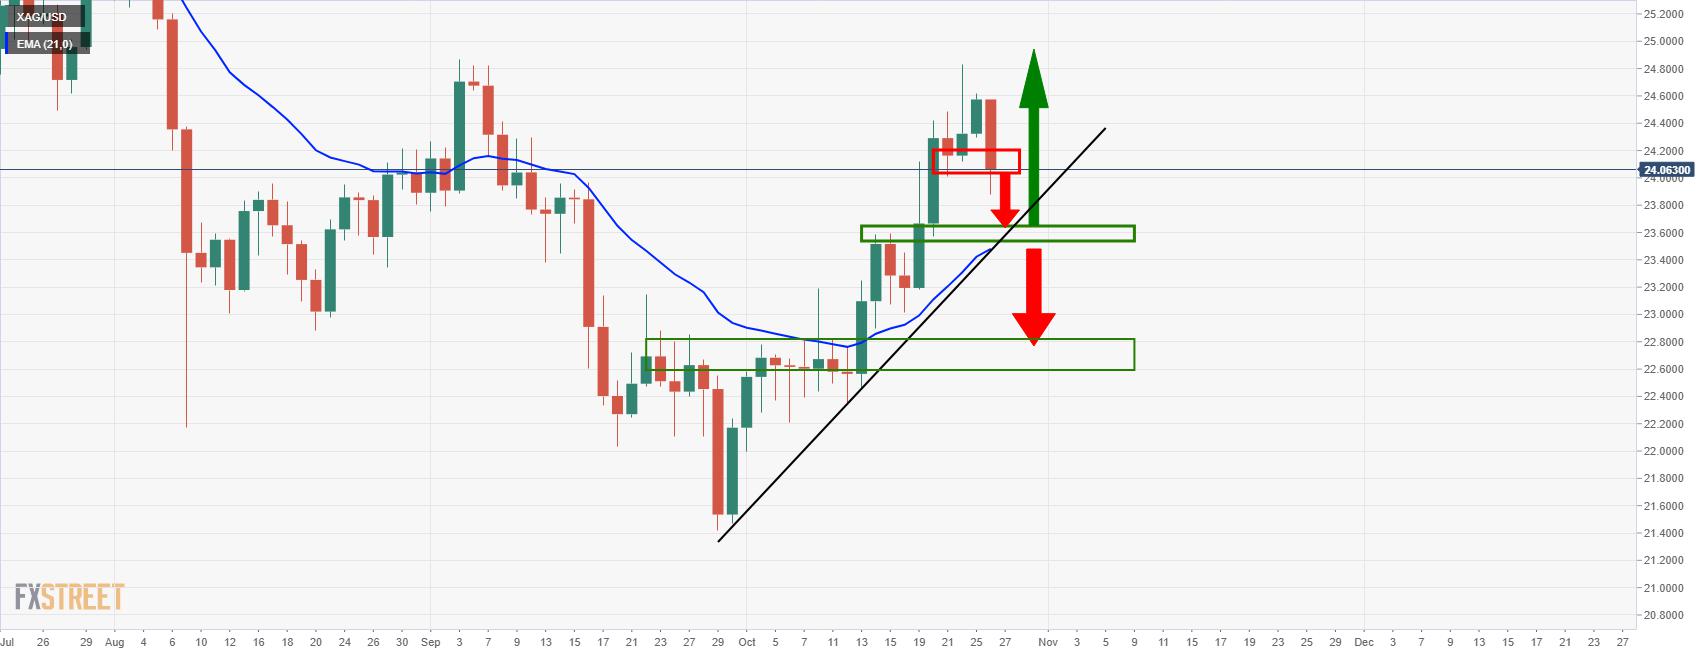 Silver is under pressure to a critical daily dynamic support